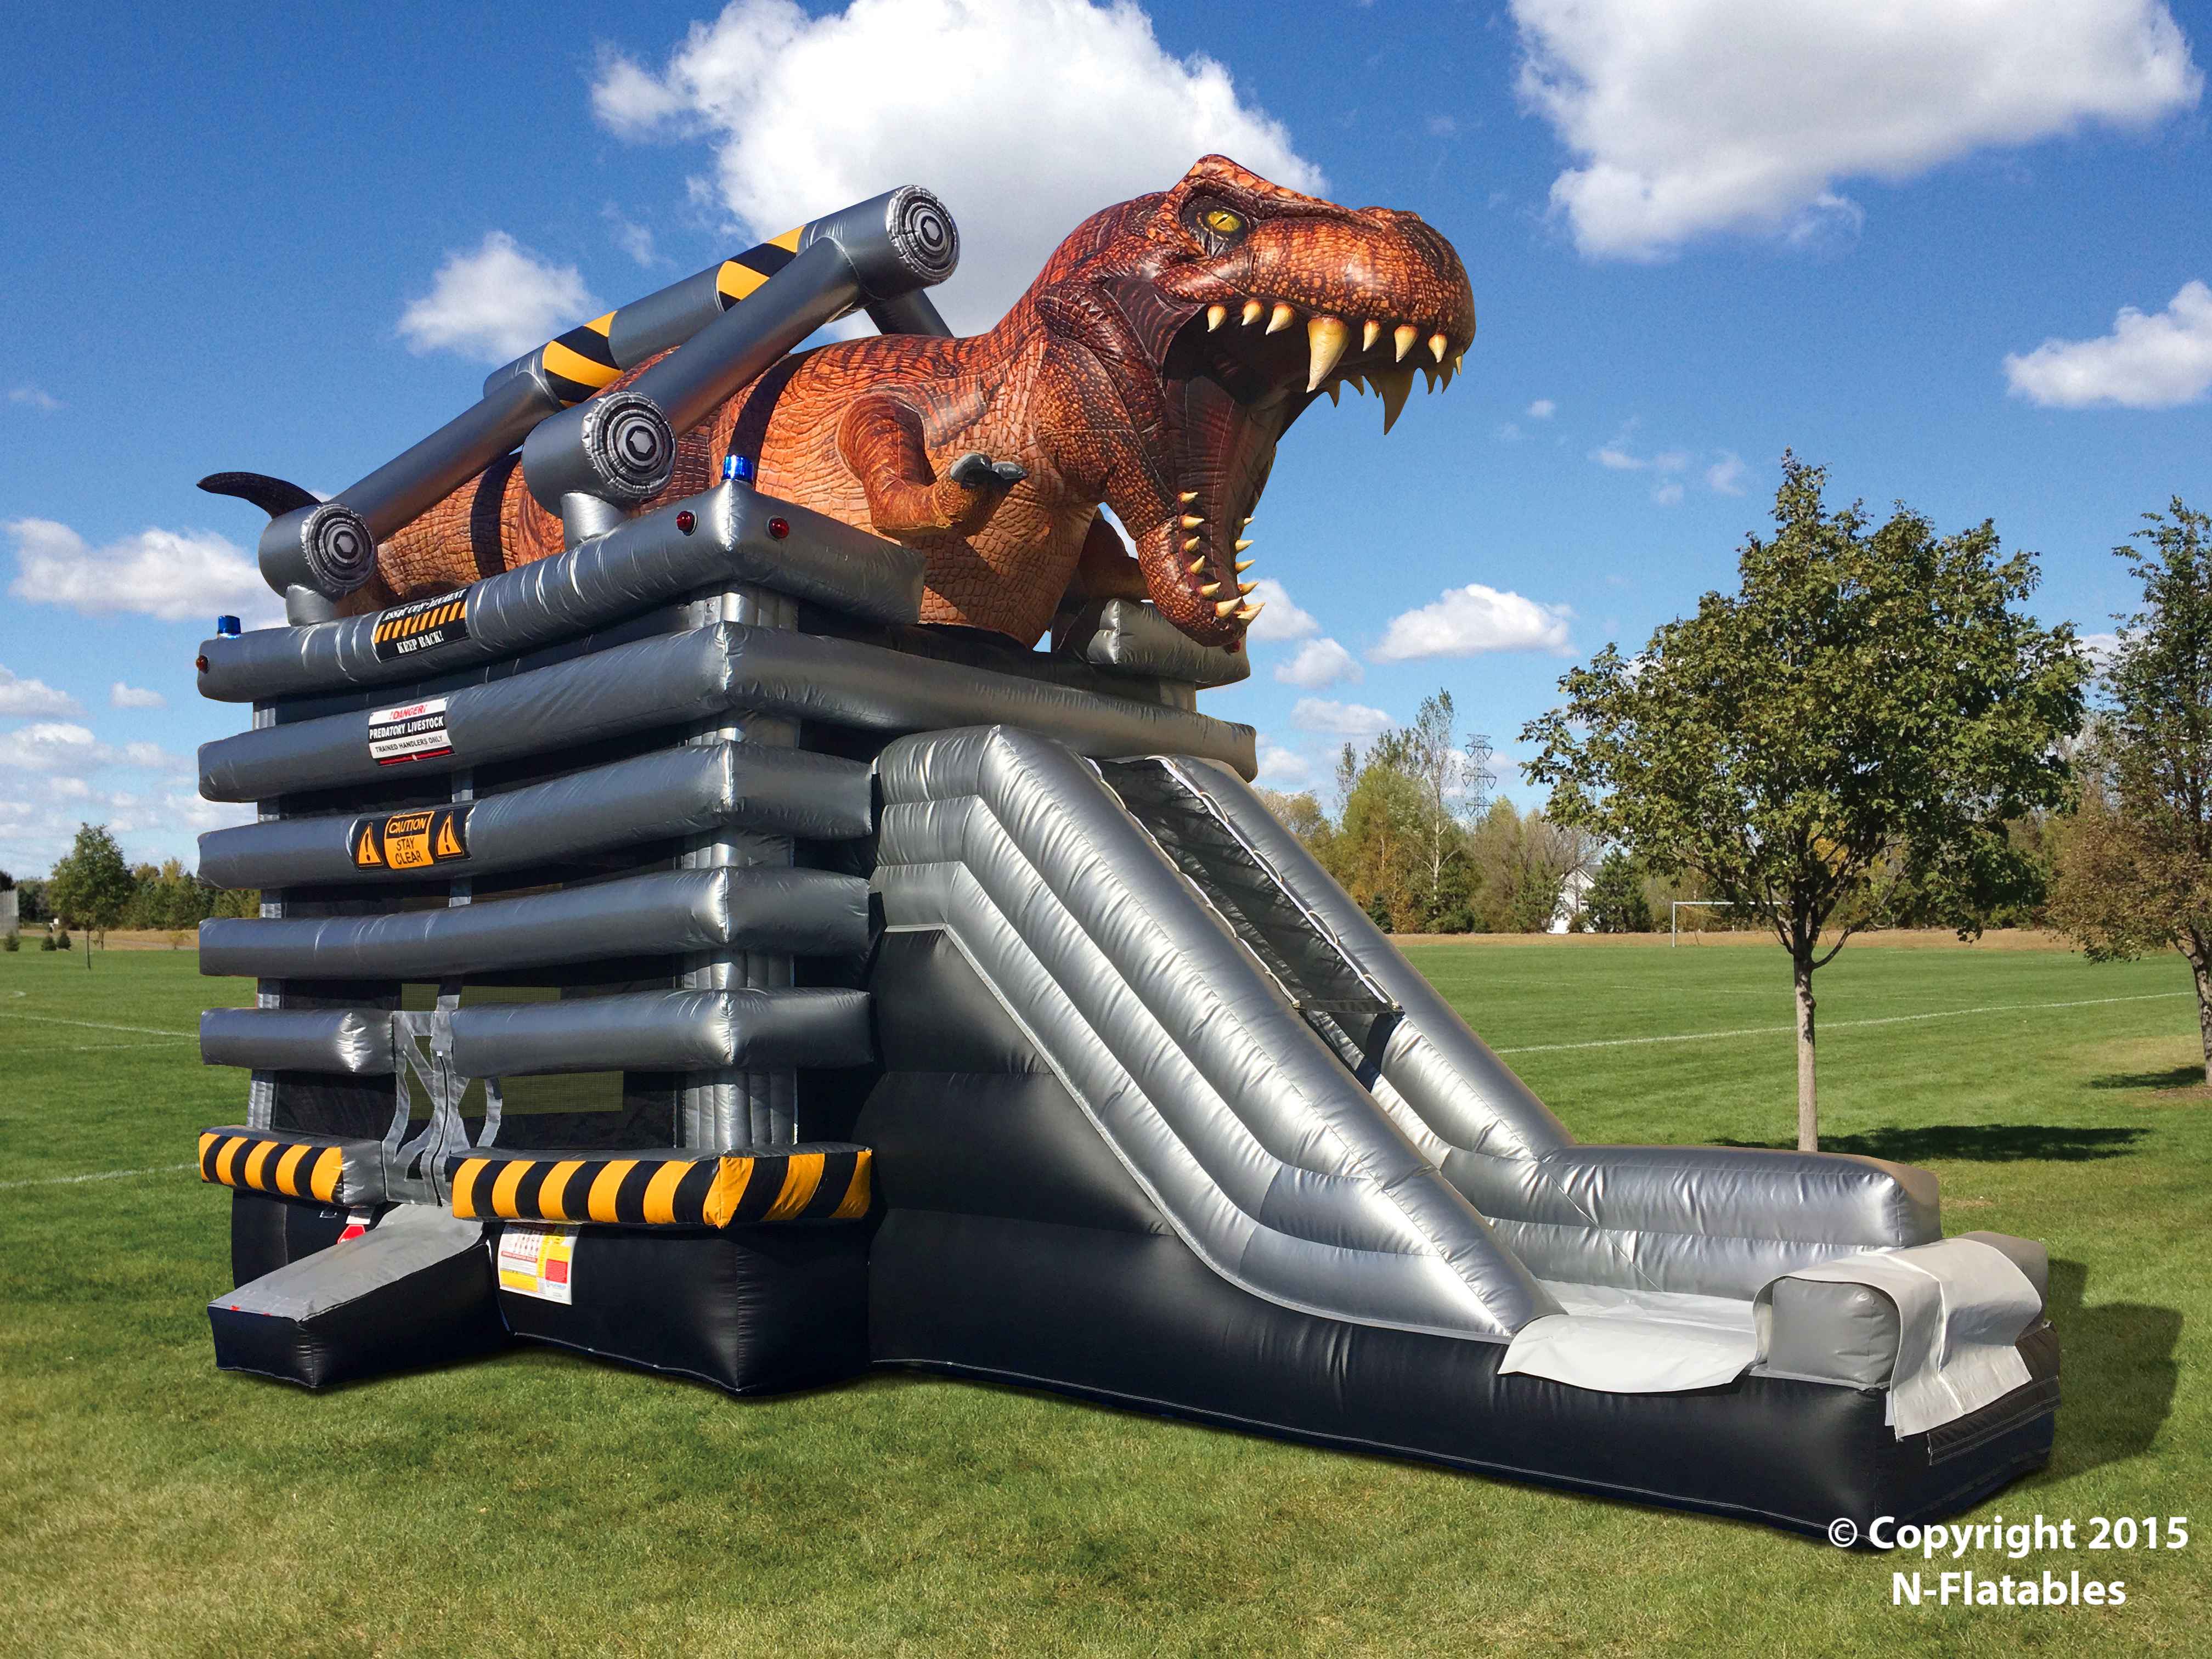 Our T-Rex Dinosaur JUMP AND Slide Combo is the only dinosaur inflatable attraction in all of Long Island .   The T-Rex features life-like graphics that makes its enormous body a work of art!   The details of the skin and the sharpness of its teeth is guaranteed to stand out more than anything you've ever seen.

We want to hear you ROOOOOAR! Don’t be afraid of T-Rex, he just wants you to have fun.  Kids and adults will be blown away when they see it.  The bounce house is located on the inside of the T-Rex's cage.  And the fun slide is accessible from inside the bounce house.  Renting the T-Rex Combo is a no-brainer for dinosaur enthusiasts, special event planners, and activity directors.